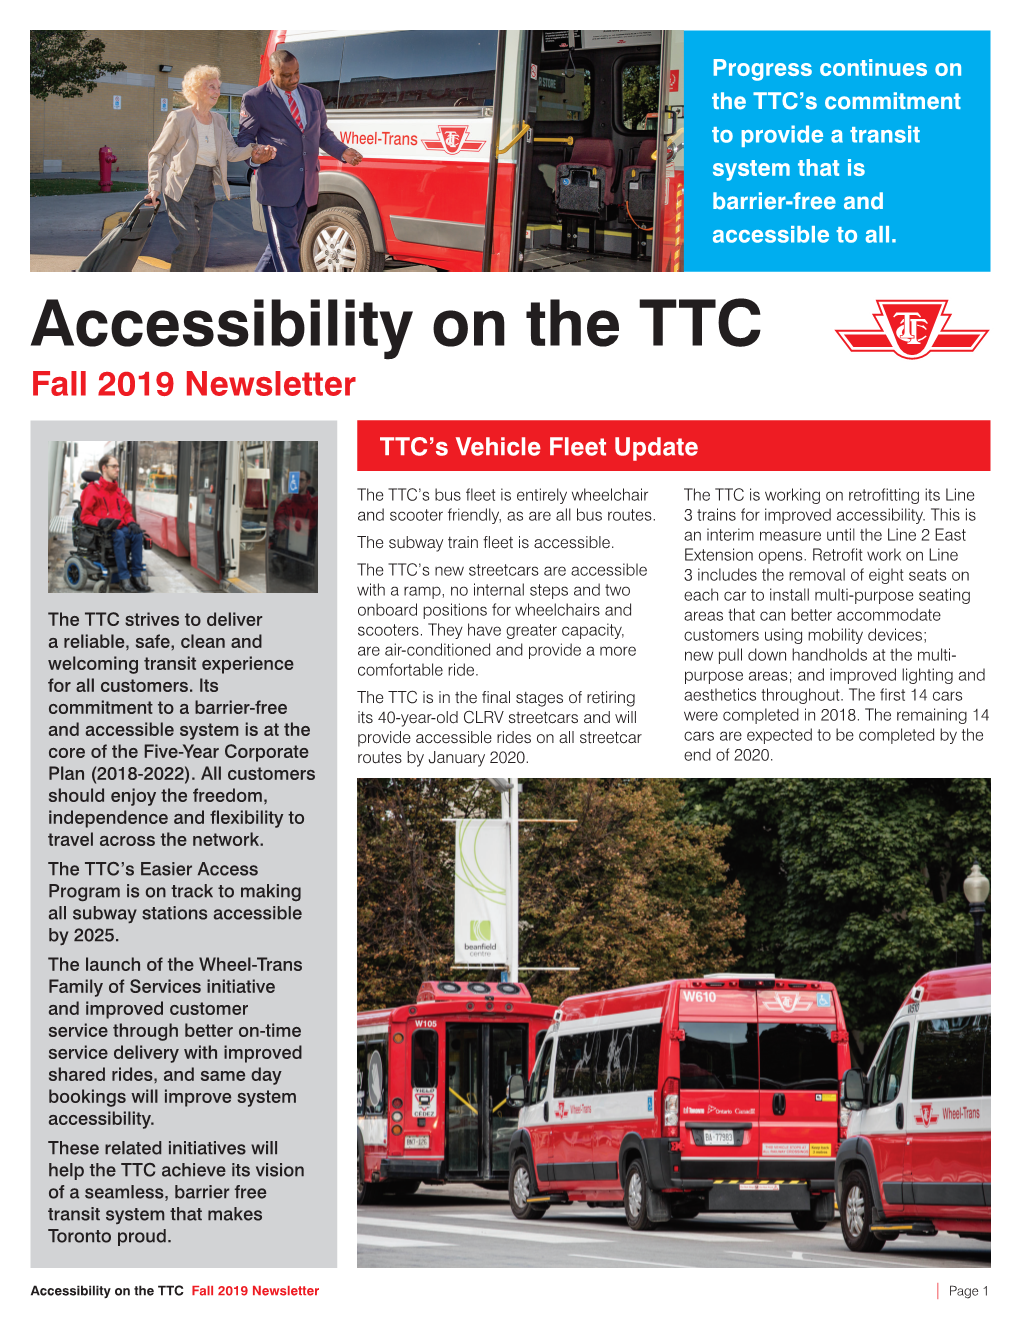 Accessibility on the TTC Fall 2019 Newsletter